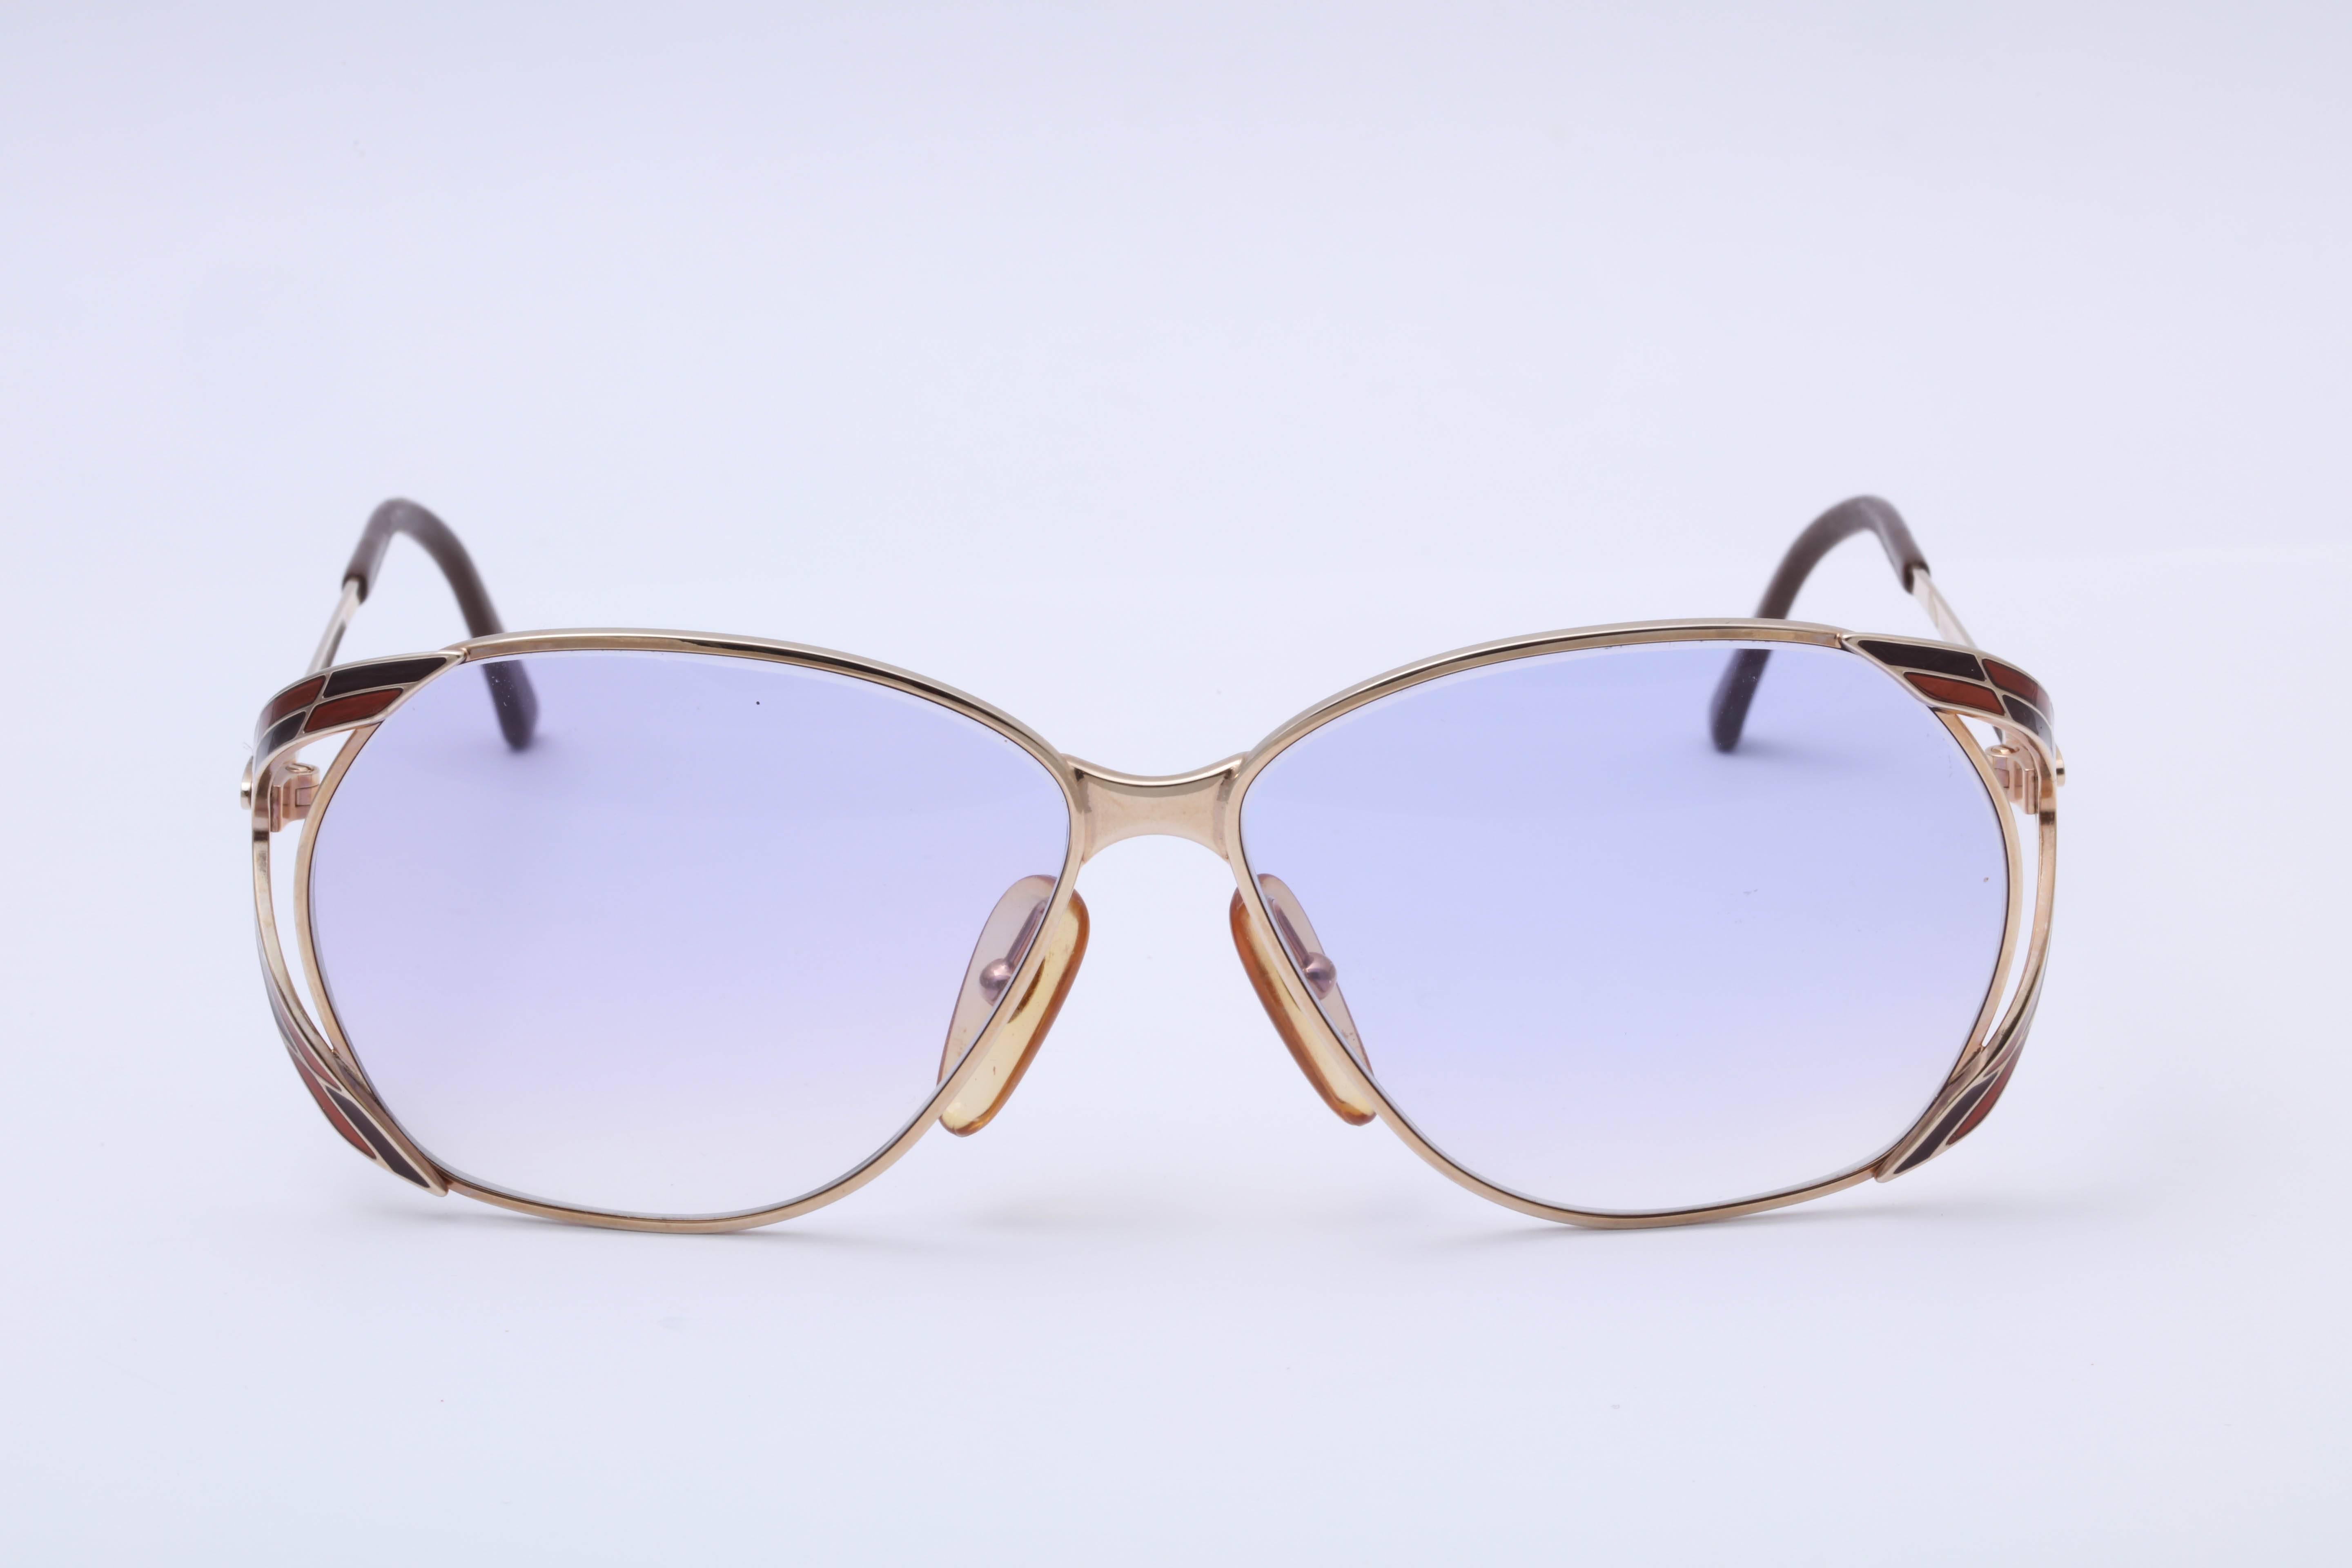 Vintage Christian Dior Sunglasses 2705 In Excellent Condition For Sale In Chicago, IL